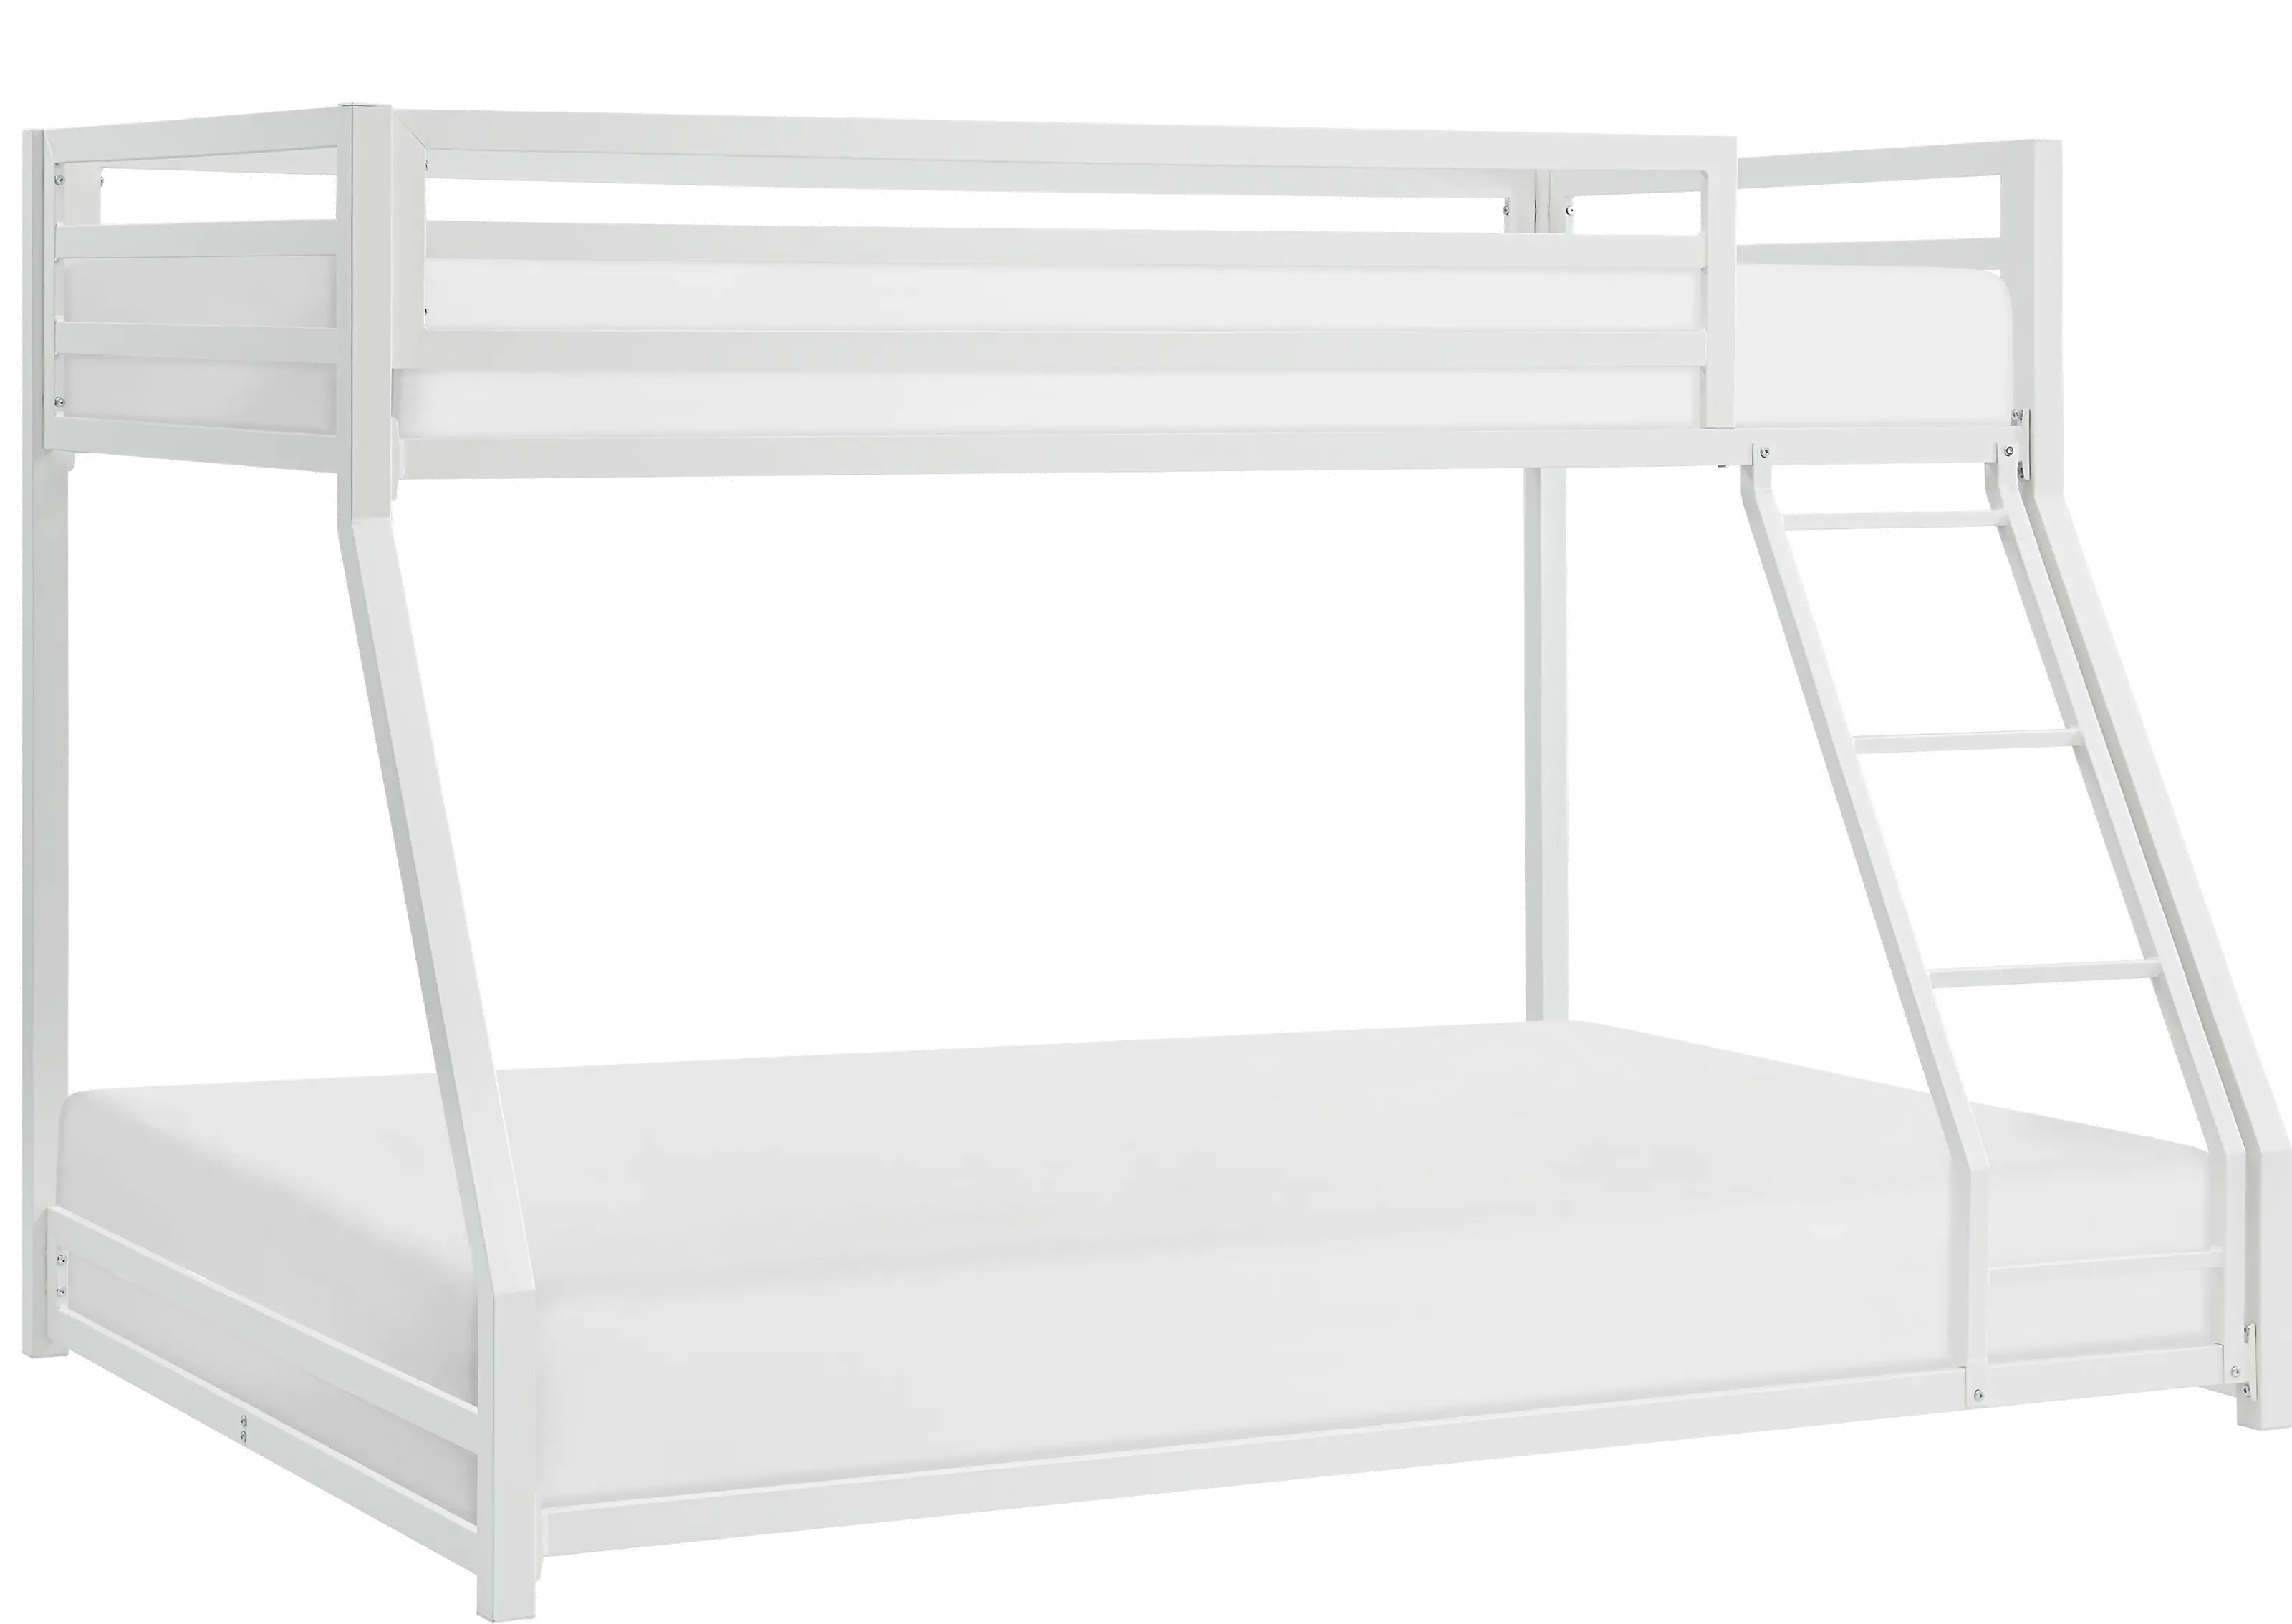 Winnie White Twin-over-Full Bunk Bed